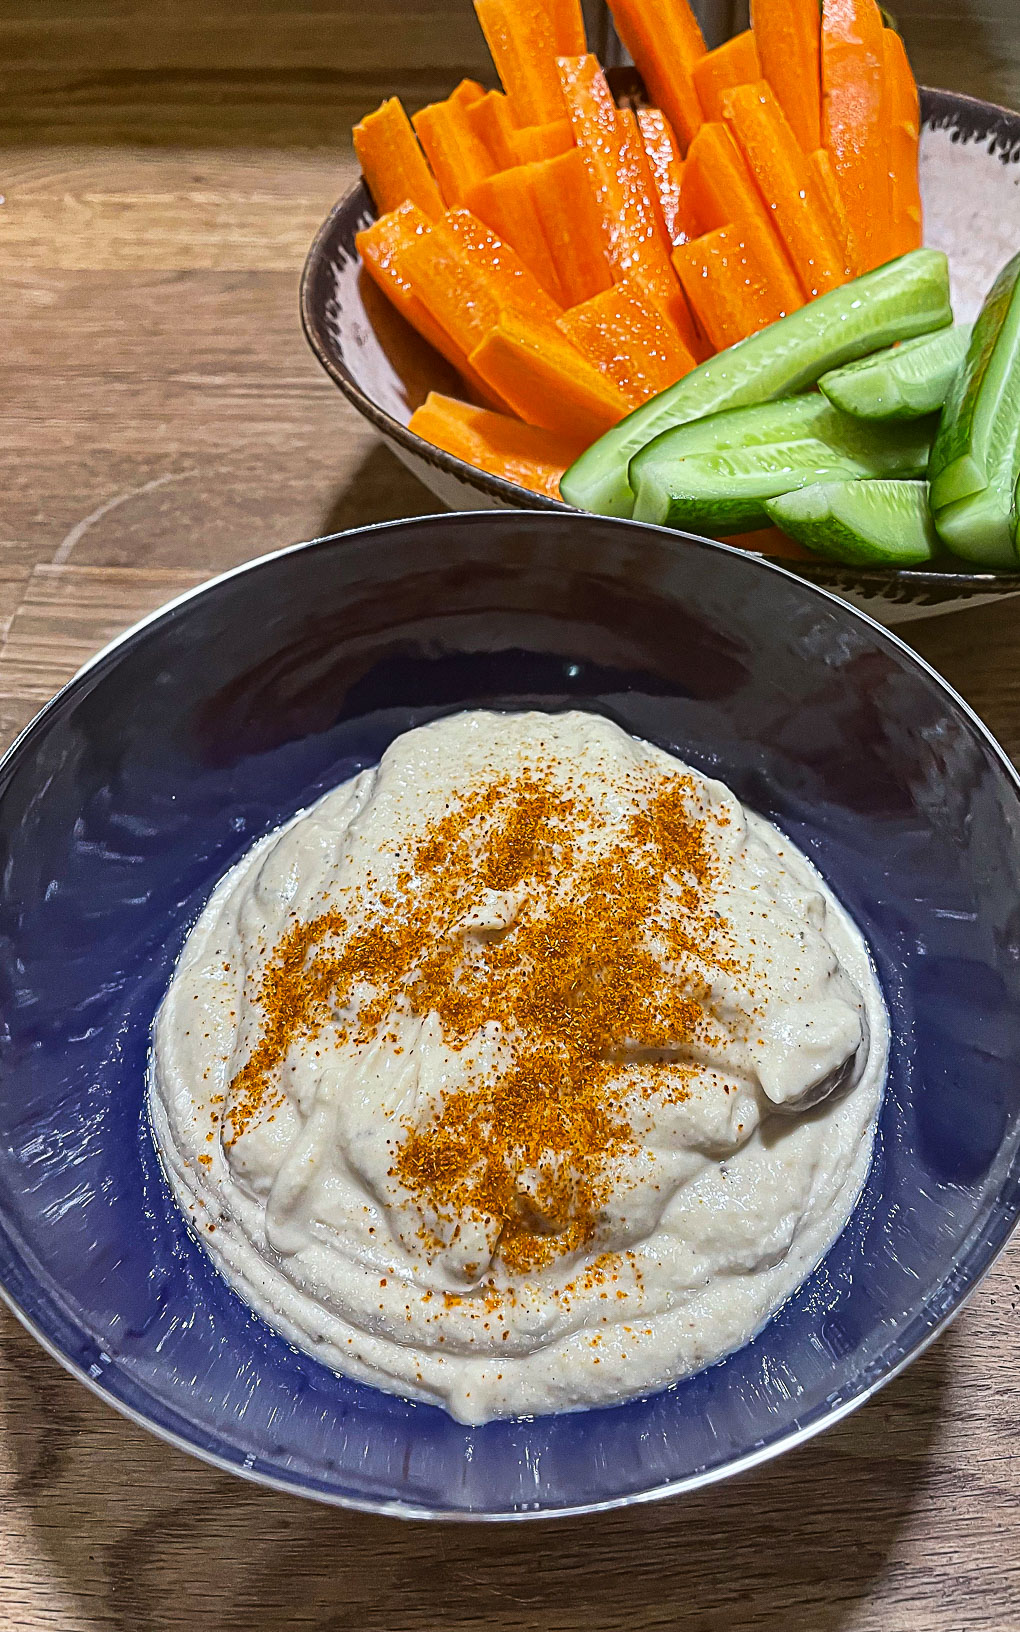 alt="a bowl of hummus sprinkled with cayenne pepper and served with sticks of carrot and cucumber."